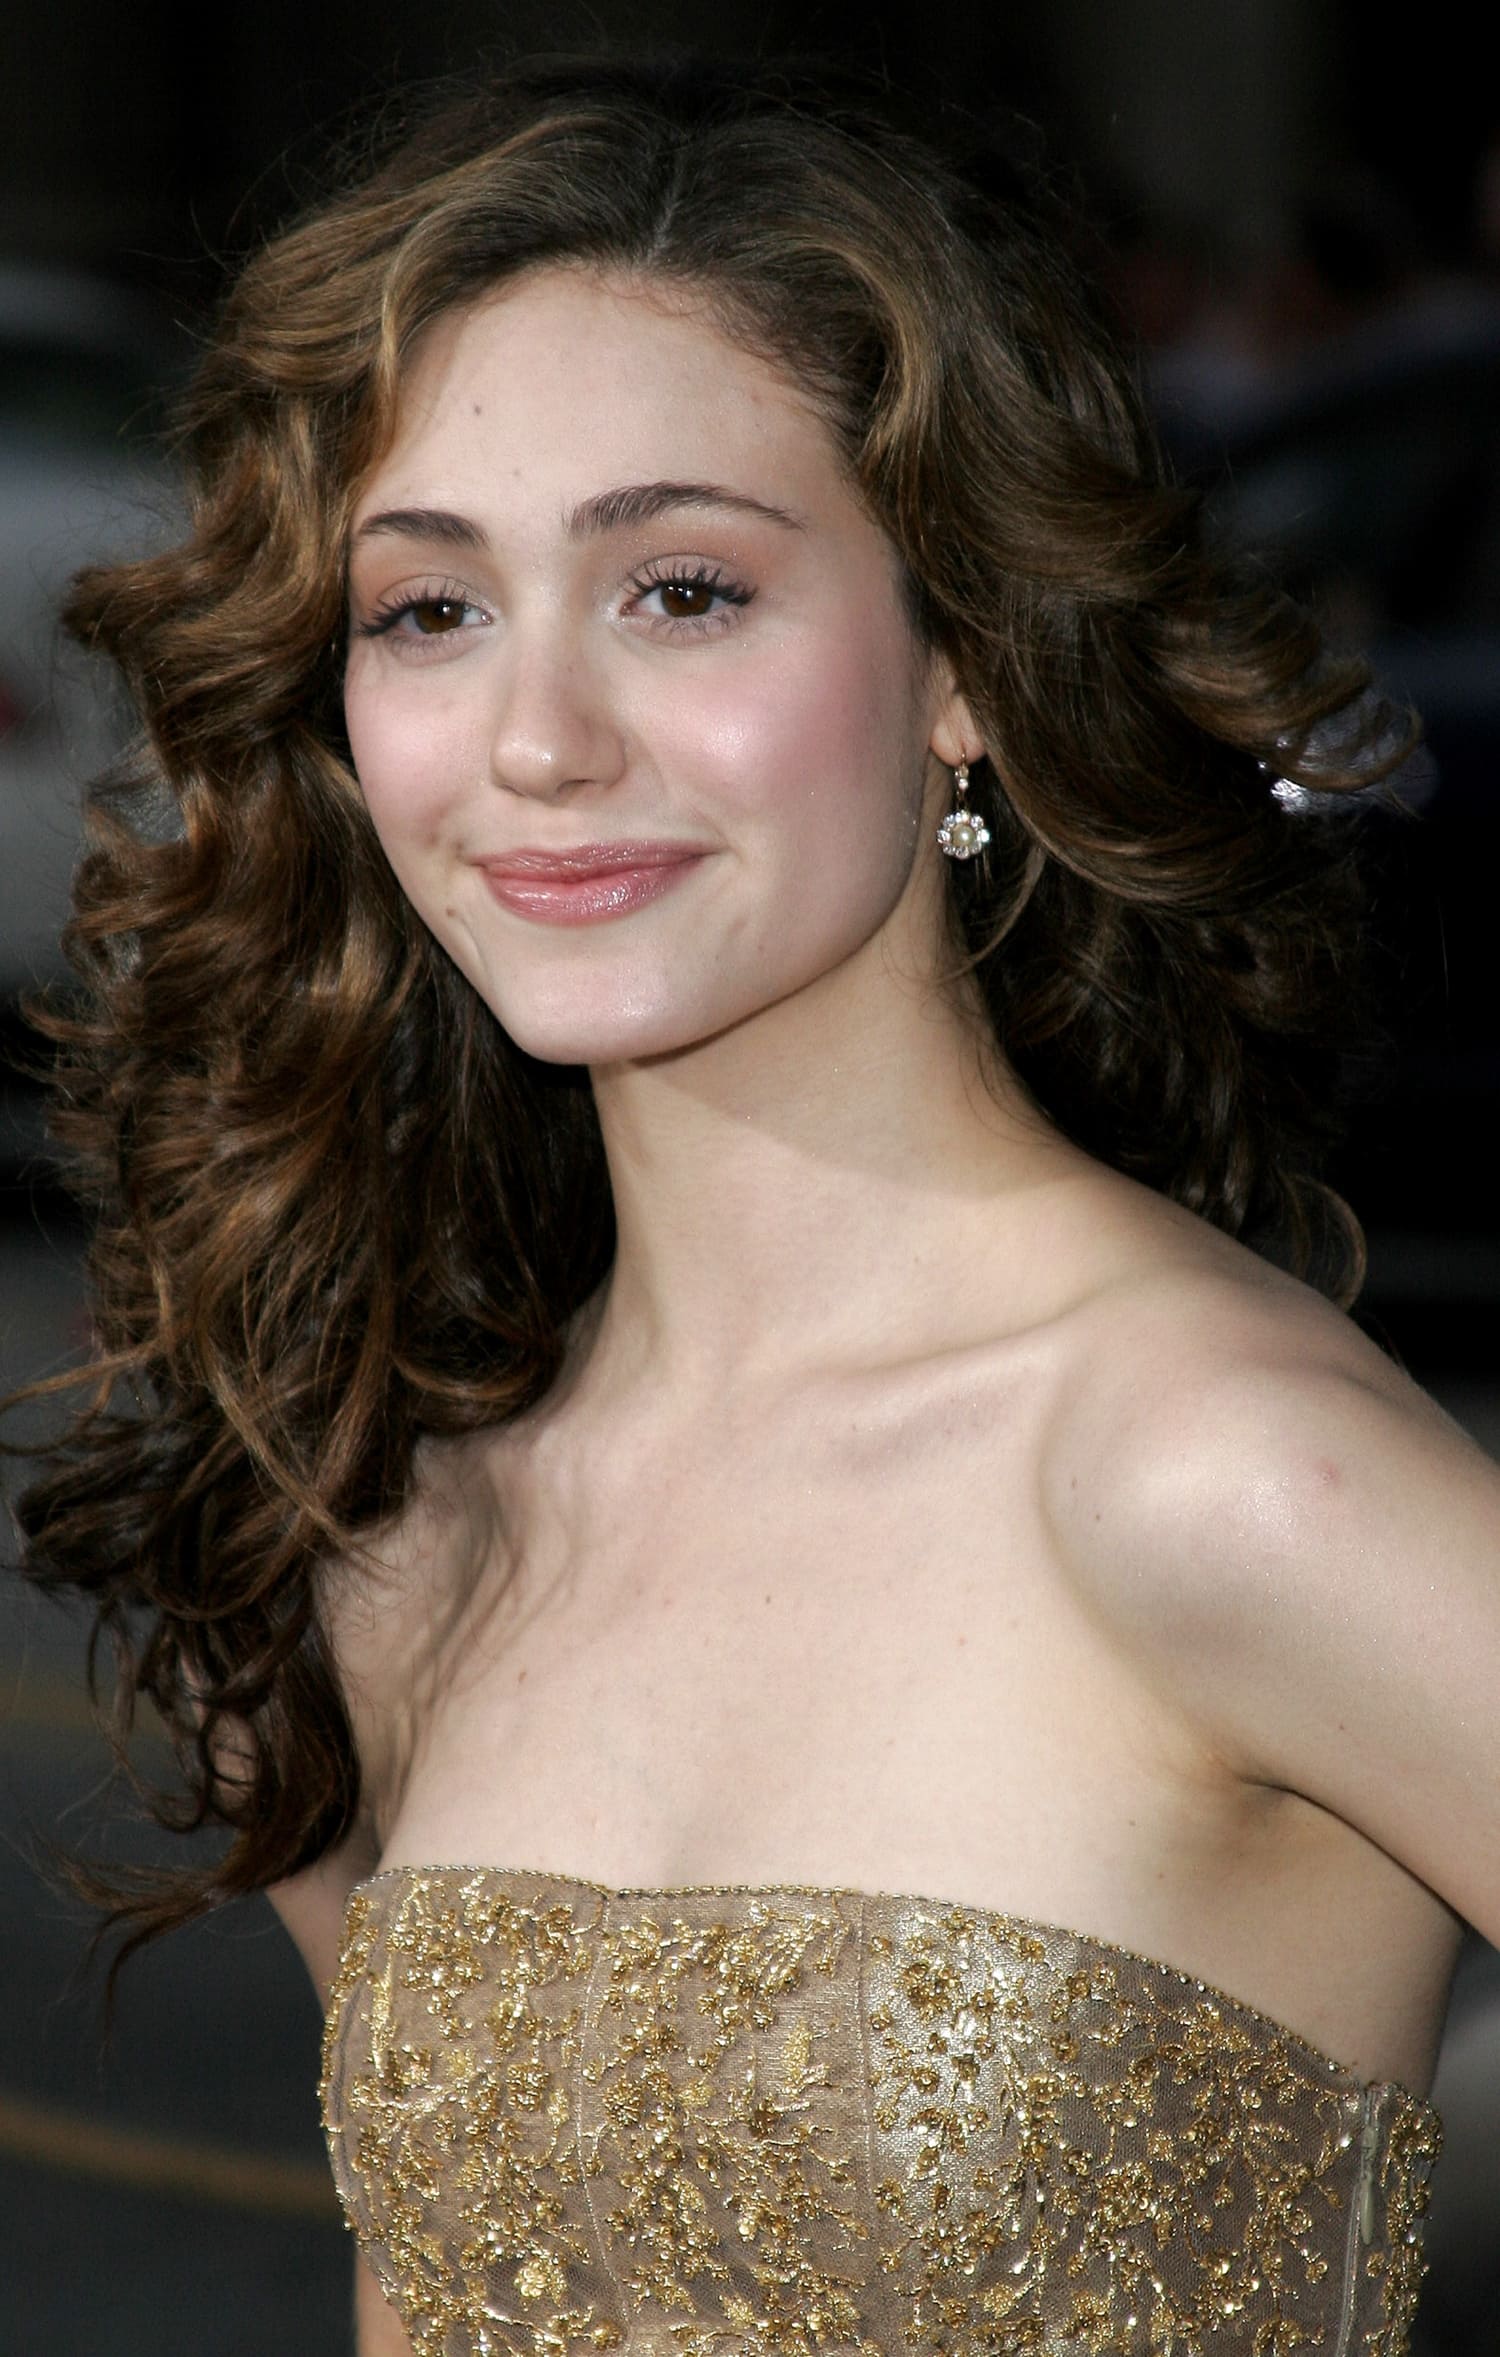 Emmy Rossum got the role of Jennifer Ramsey in Poseidon after Lindsay Lohan turned down the part